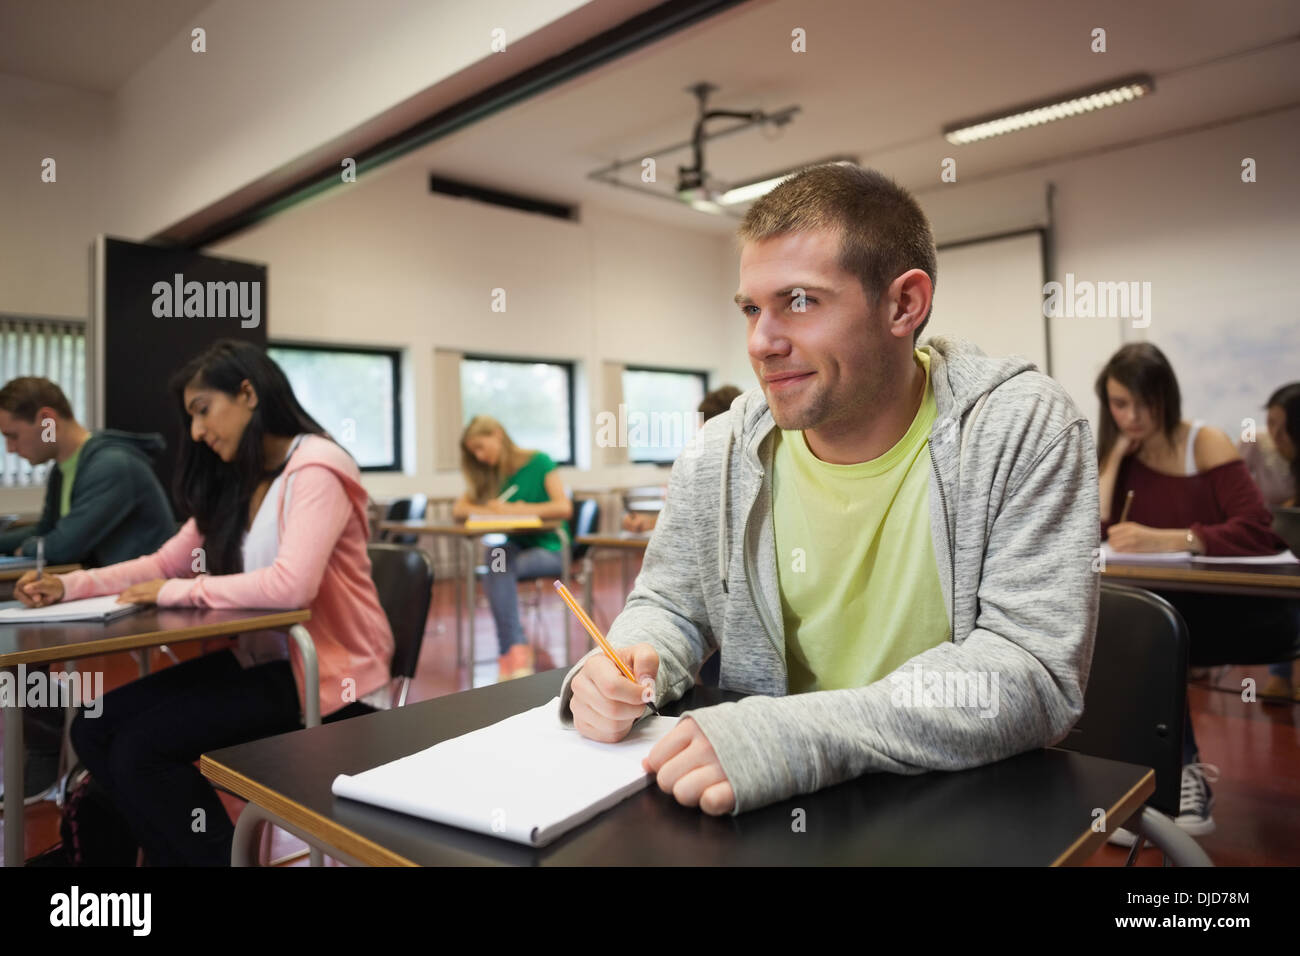 Smiling male student listening in class Stock Photo